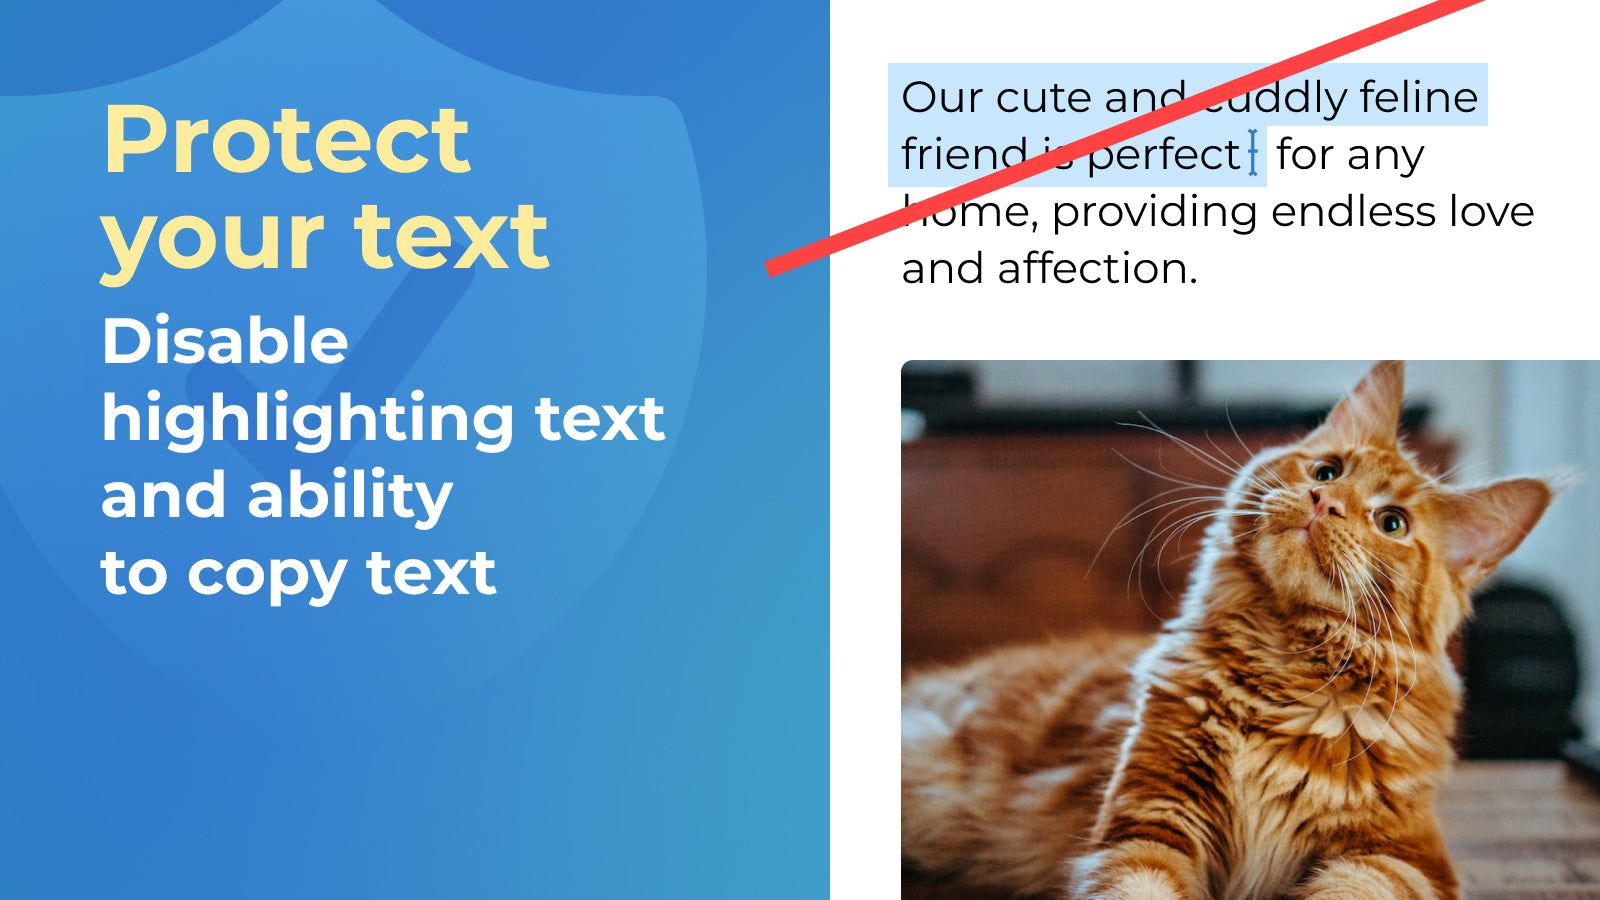 Protect your text: Disable highlighting text and ability to copy